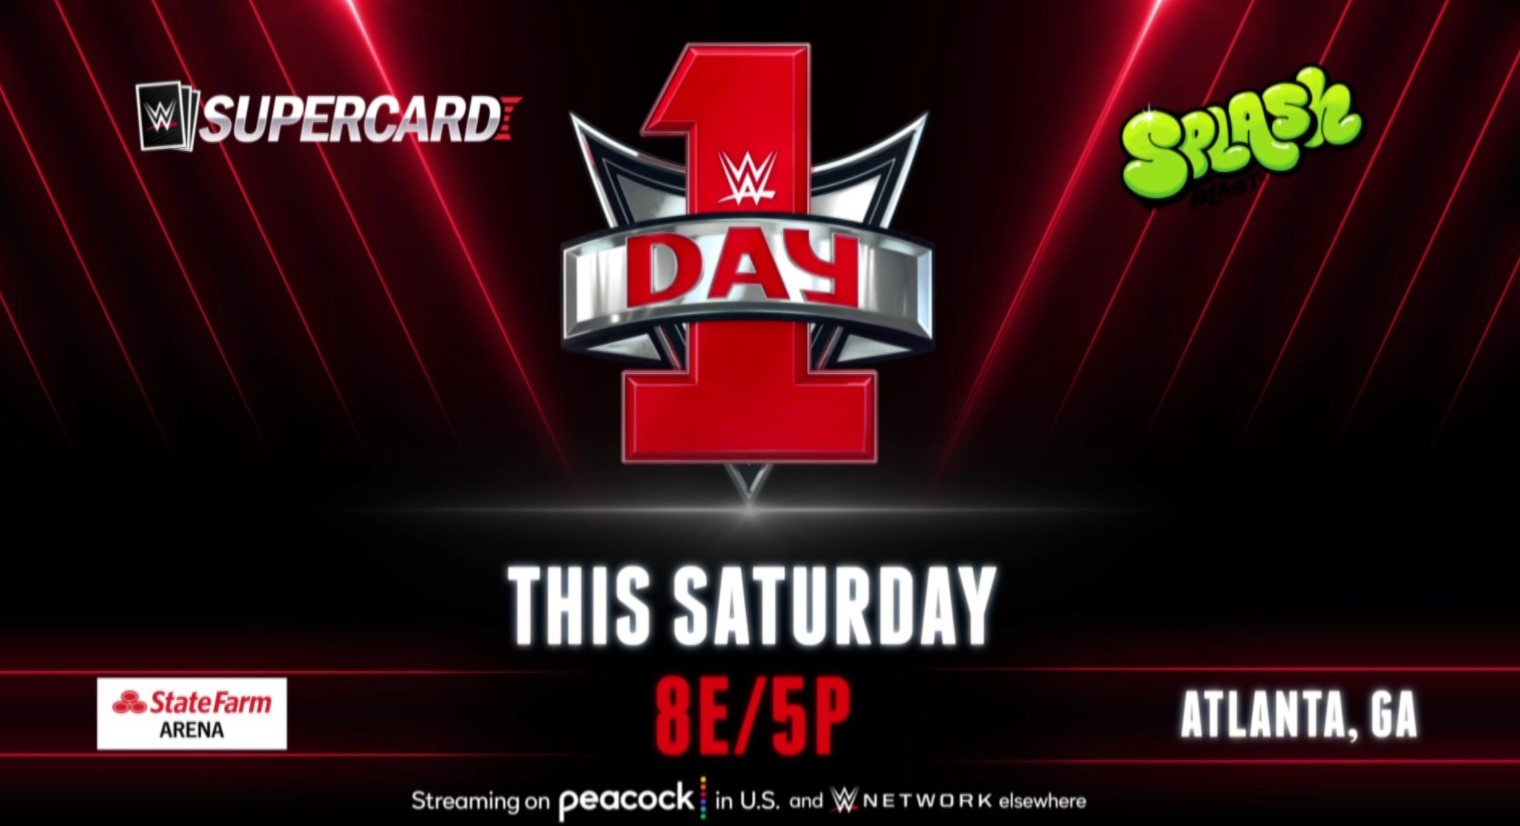 WWE Day 1 Predictions: Check out the predicted winners for WWE Day 1 announced matches